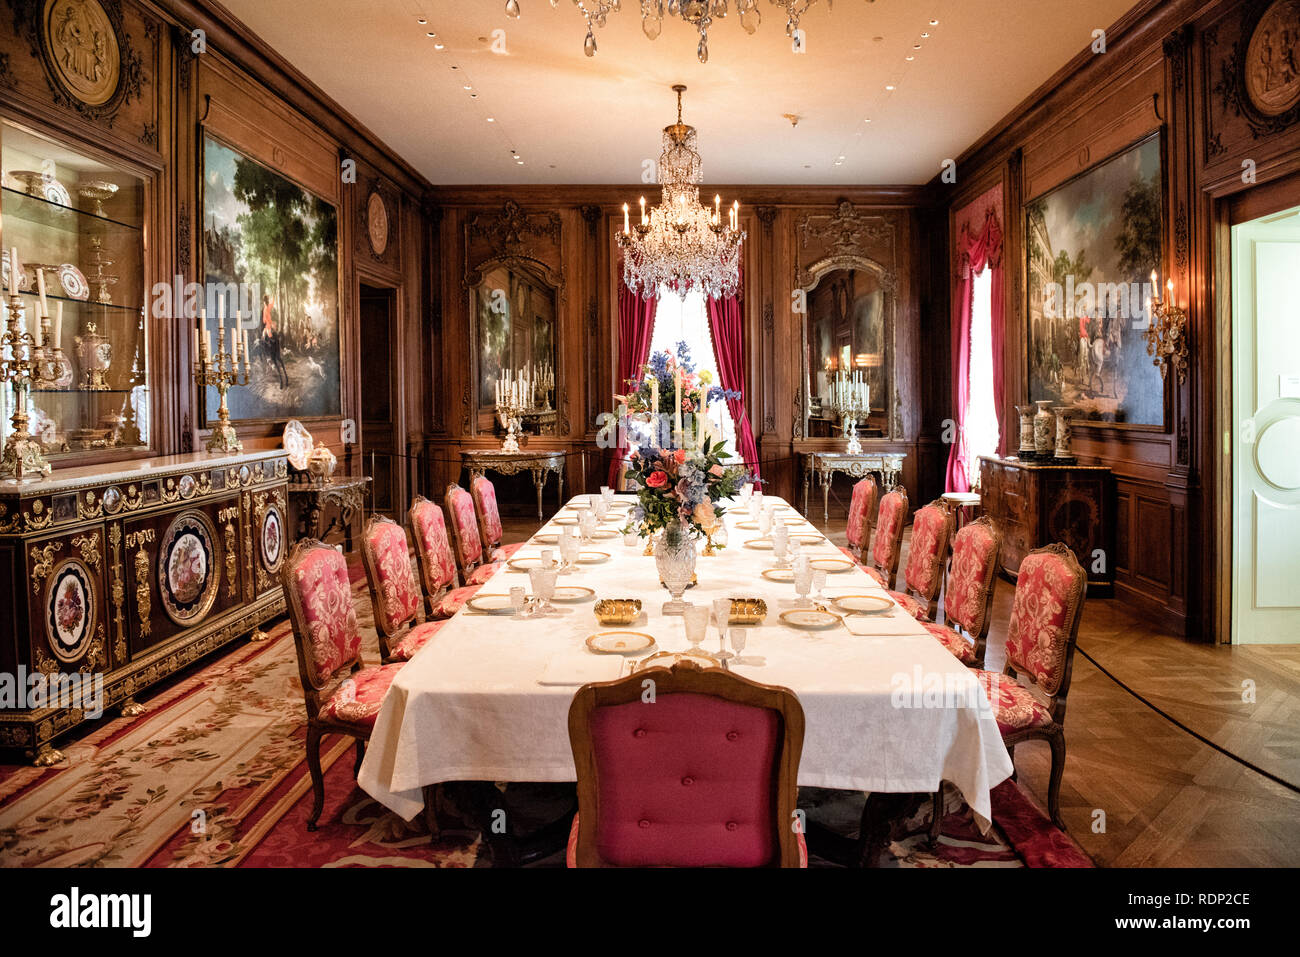 WASHINGTON DC, United States — The main dining room at Hillwood Estate. Hillwood Estate and Museum in Washington DC is the former residence of businesswoman, socialite, philanthropist, and collector Marjorie Merriweather Post, Hillwood is known for housing and displaying Post's large collection of decorative arts, with particular strengths in collections from the House of Romanov, including Fabergé eggs. Other highlights are 18th and 19th century French art and one of the country's finest orchid collections. Stock Photo